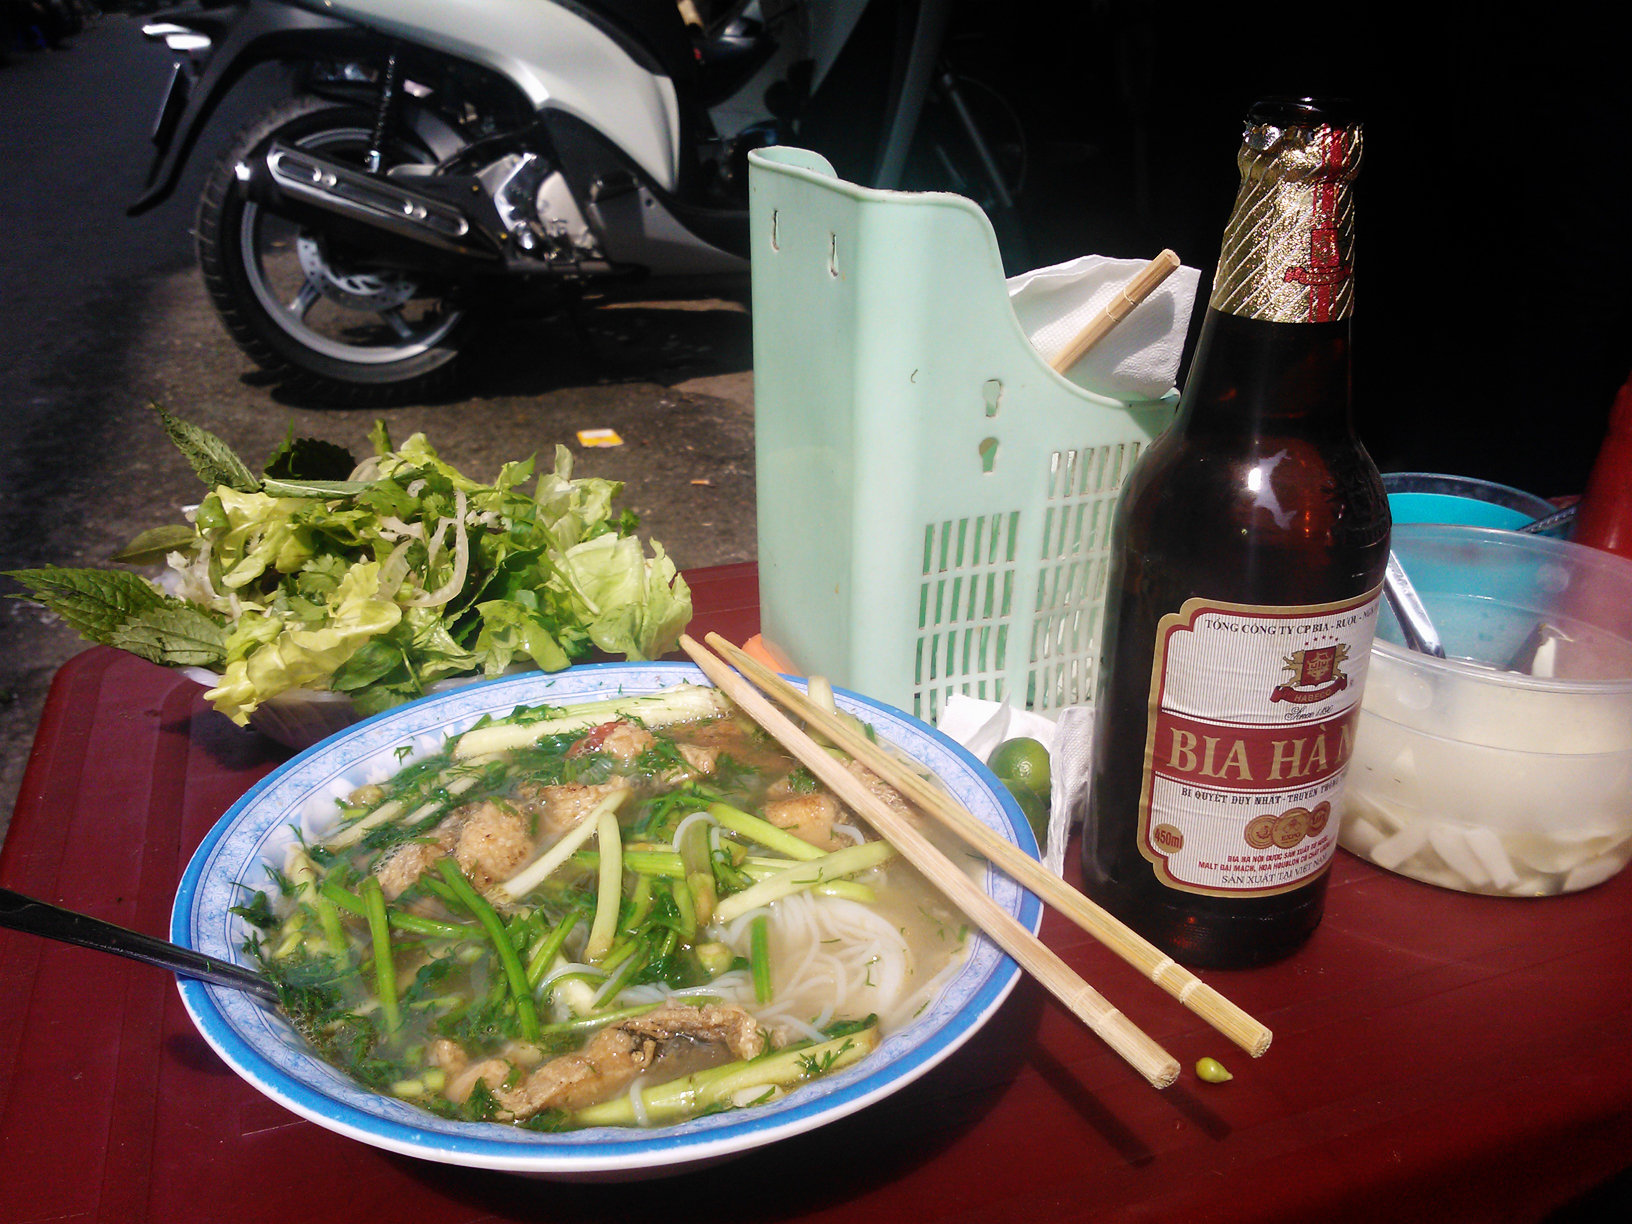 Ha Noi - A typical soup with noodles and beef, tastes amazing! Especially with a cold beer.